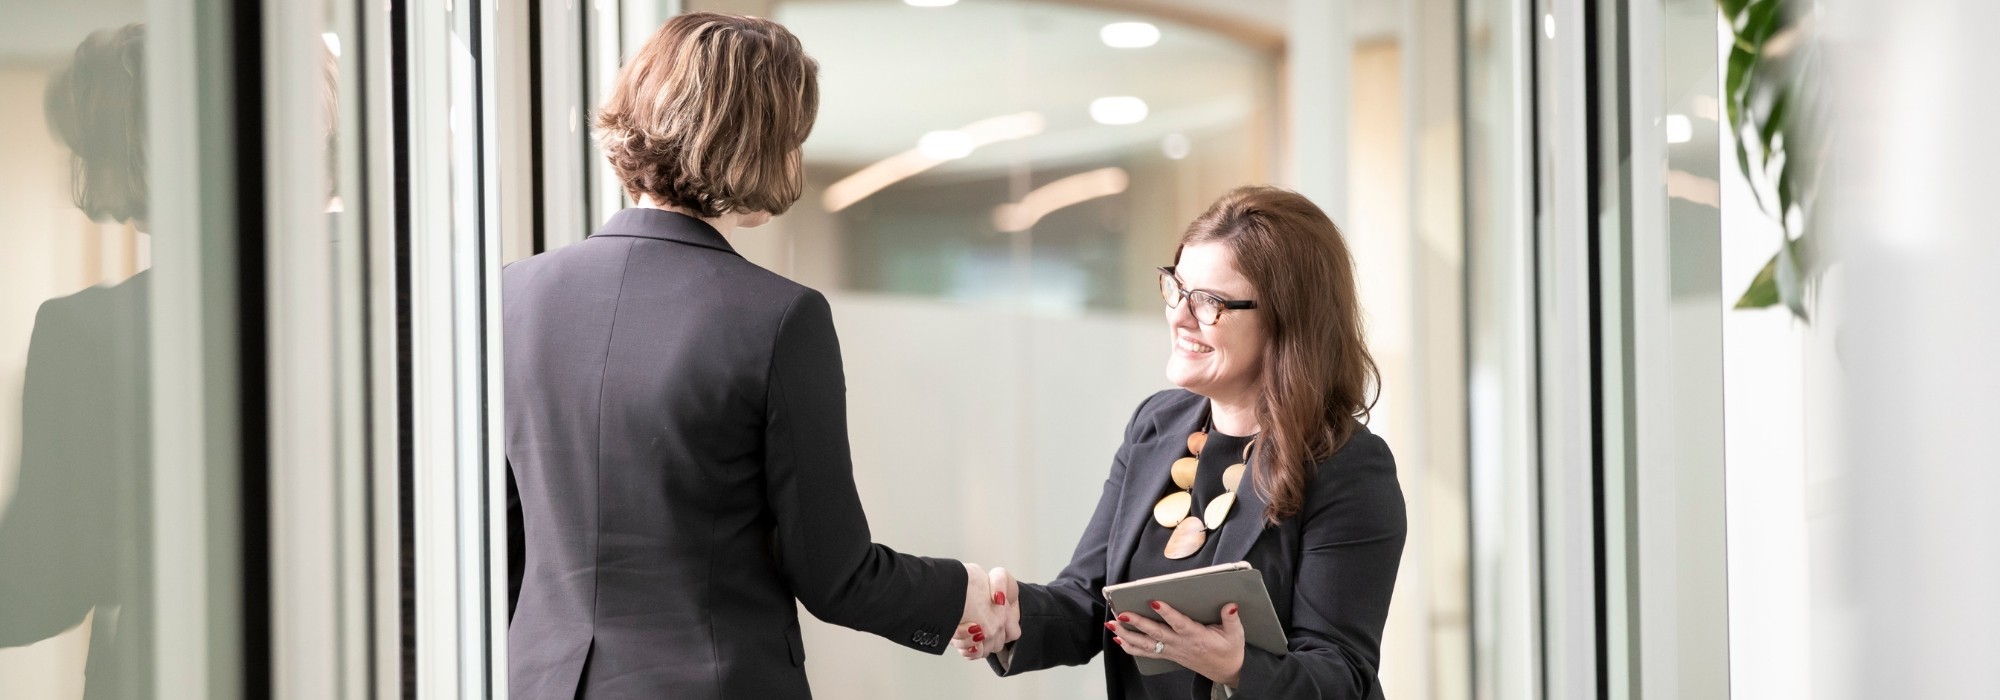 Recruiter shaking hands with client